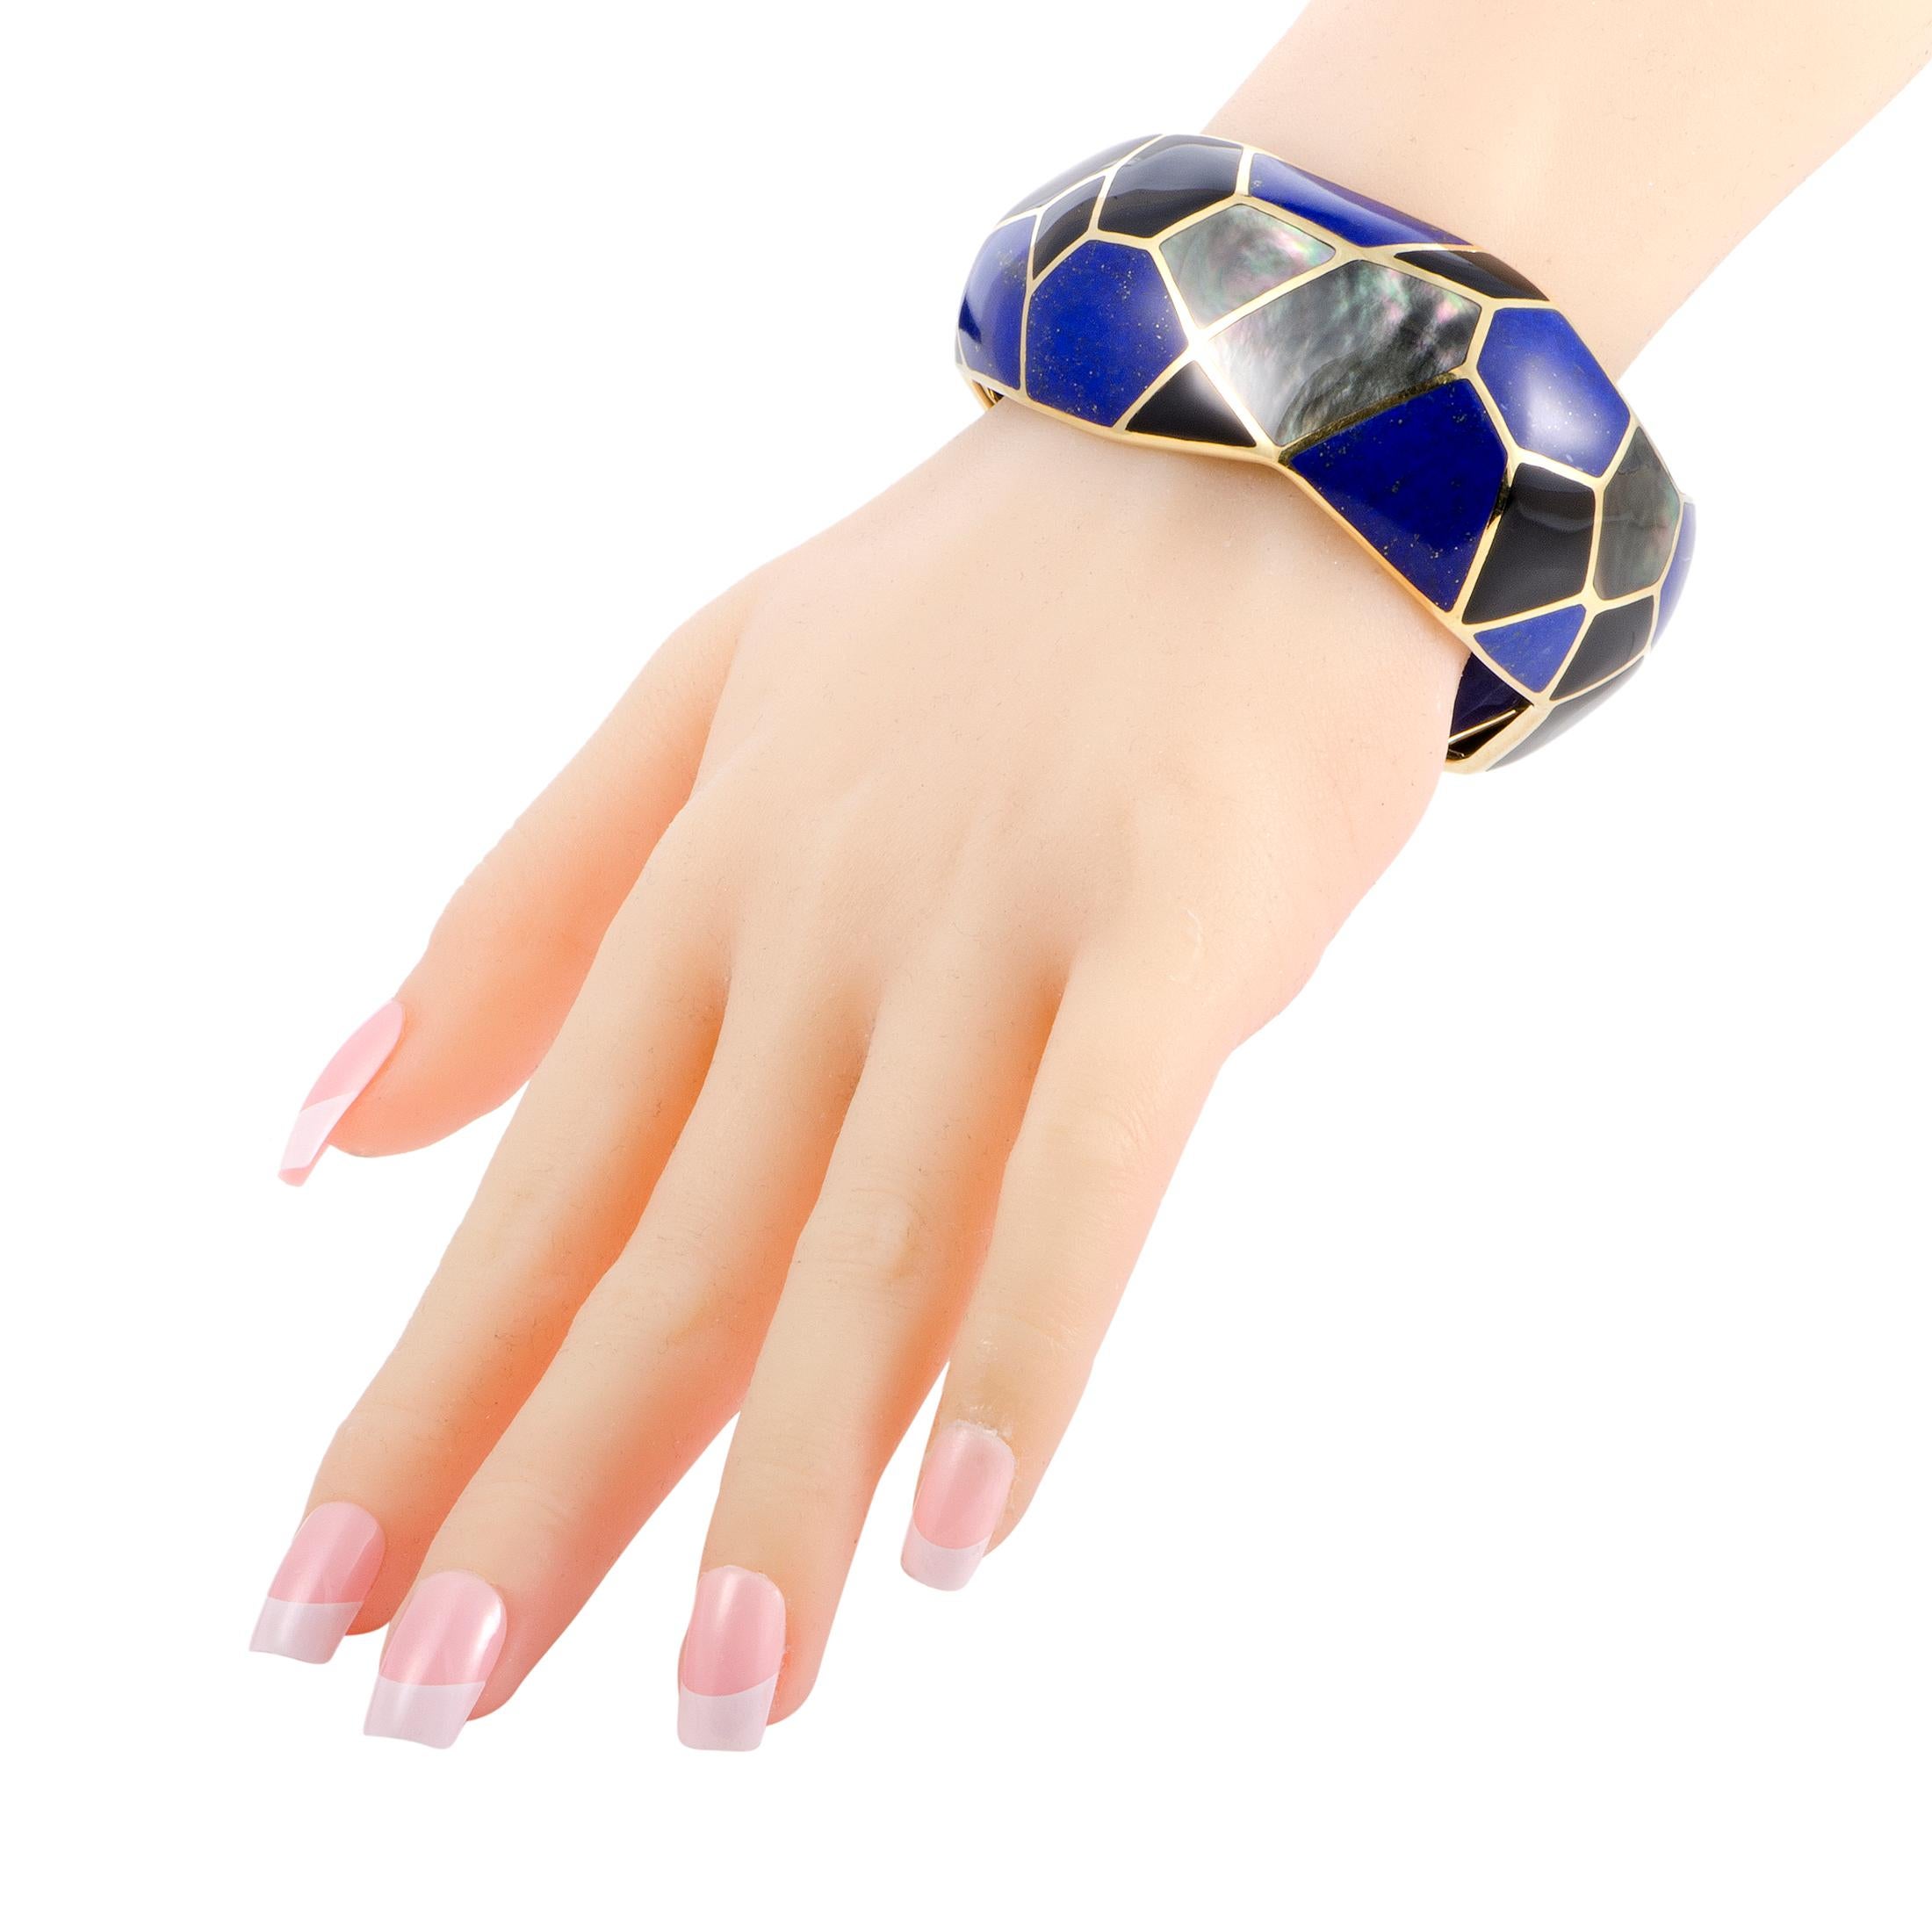 Incredibly attractive, with offbeat fashionable design, this stunning Ippolita bracelet from the “Rock Candy” collection is made of quintessential 18K yellow gold and boasts eye-catching mosaic décor comprised of majestic onyx, lapis lazuli and